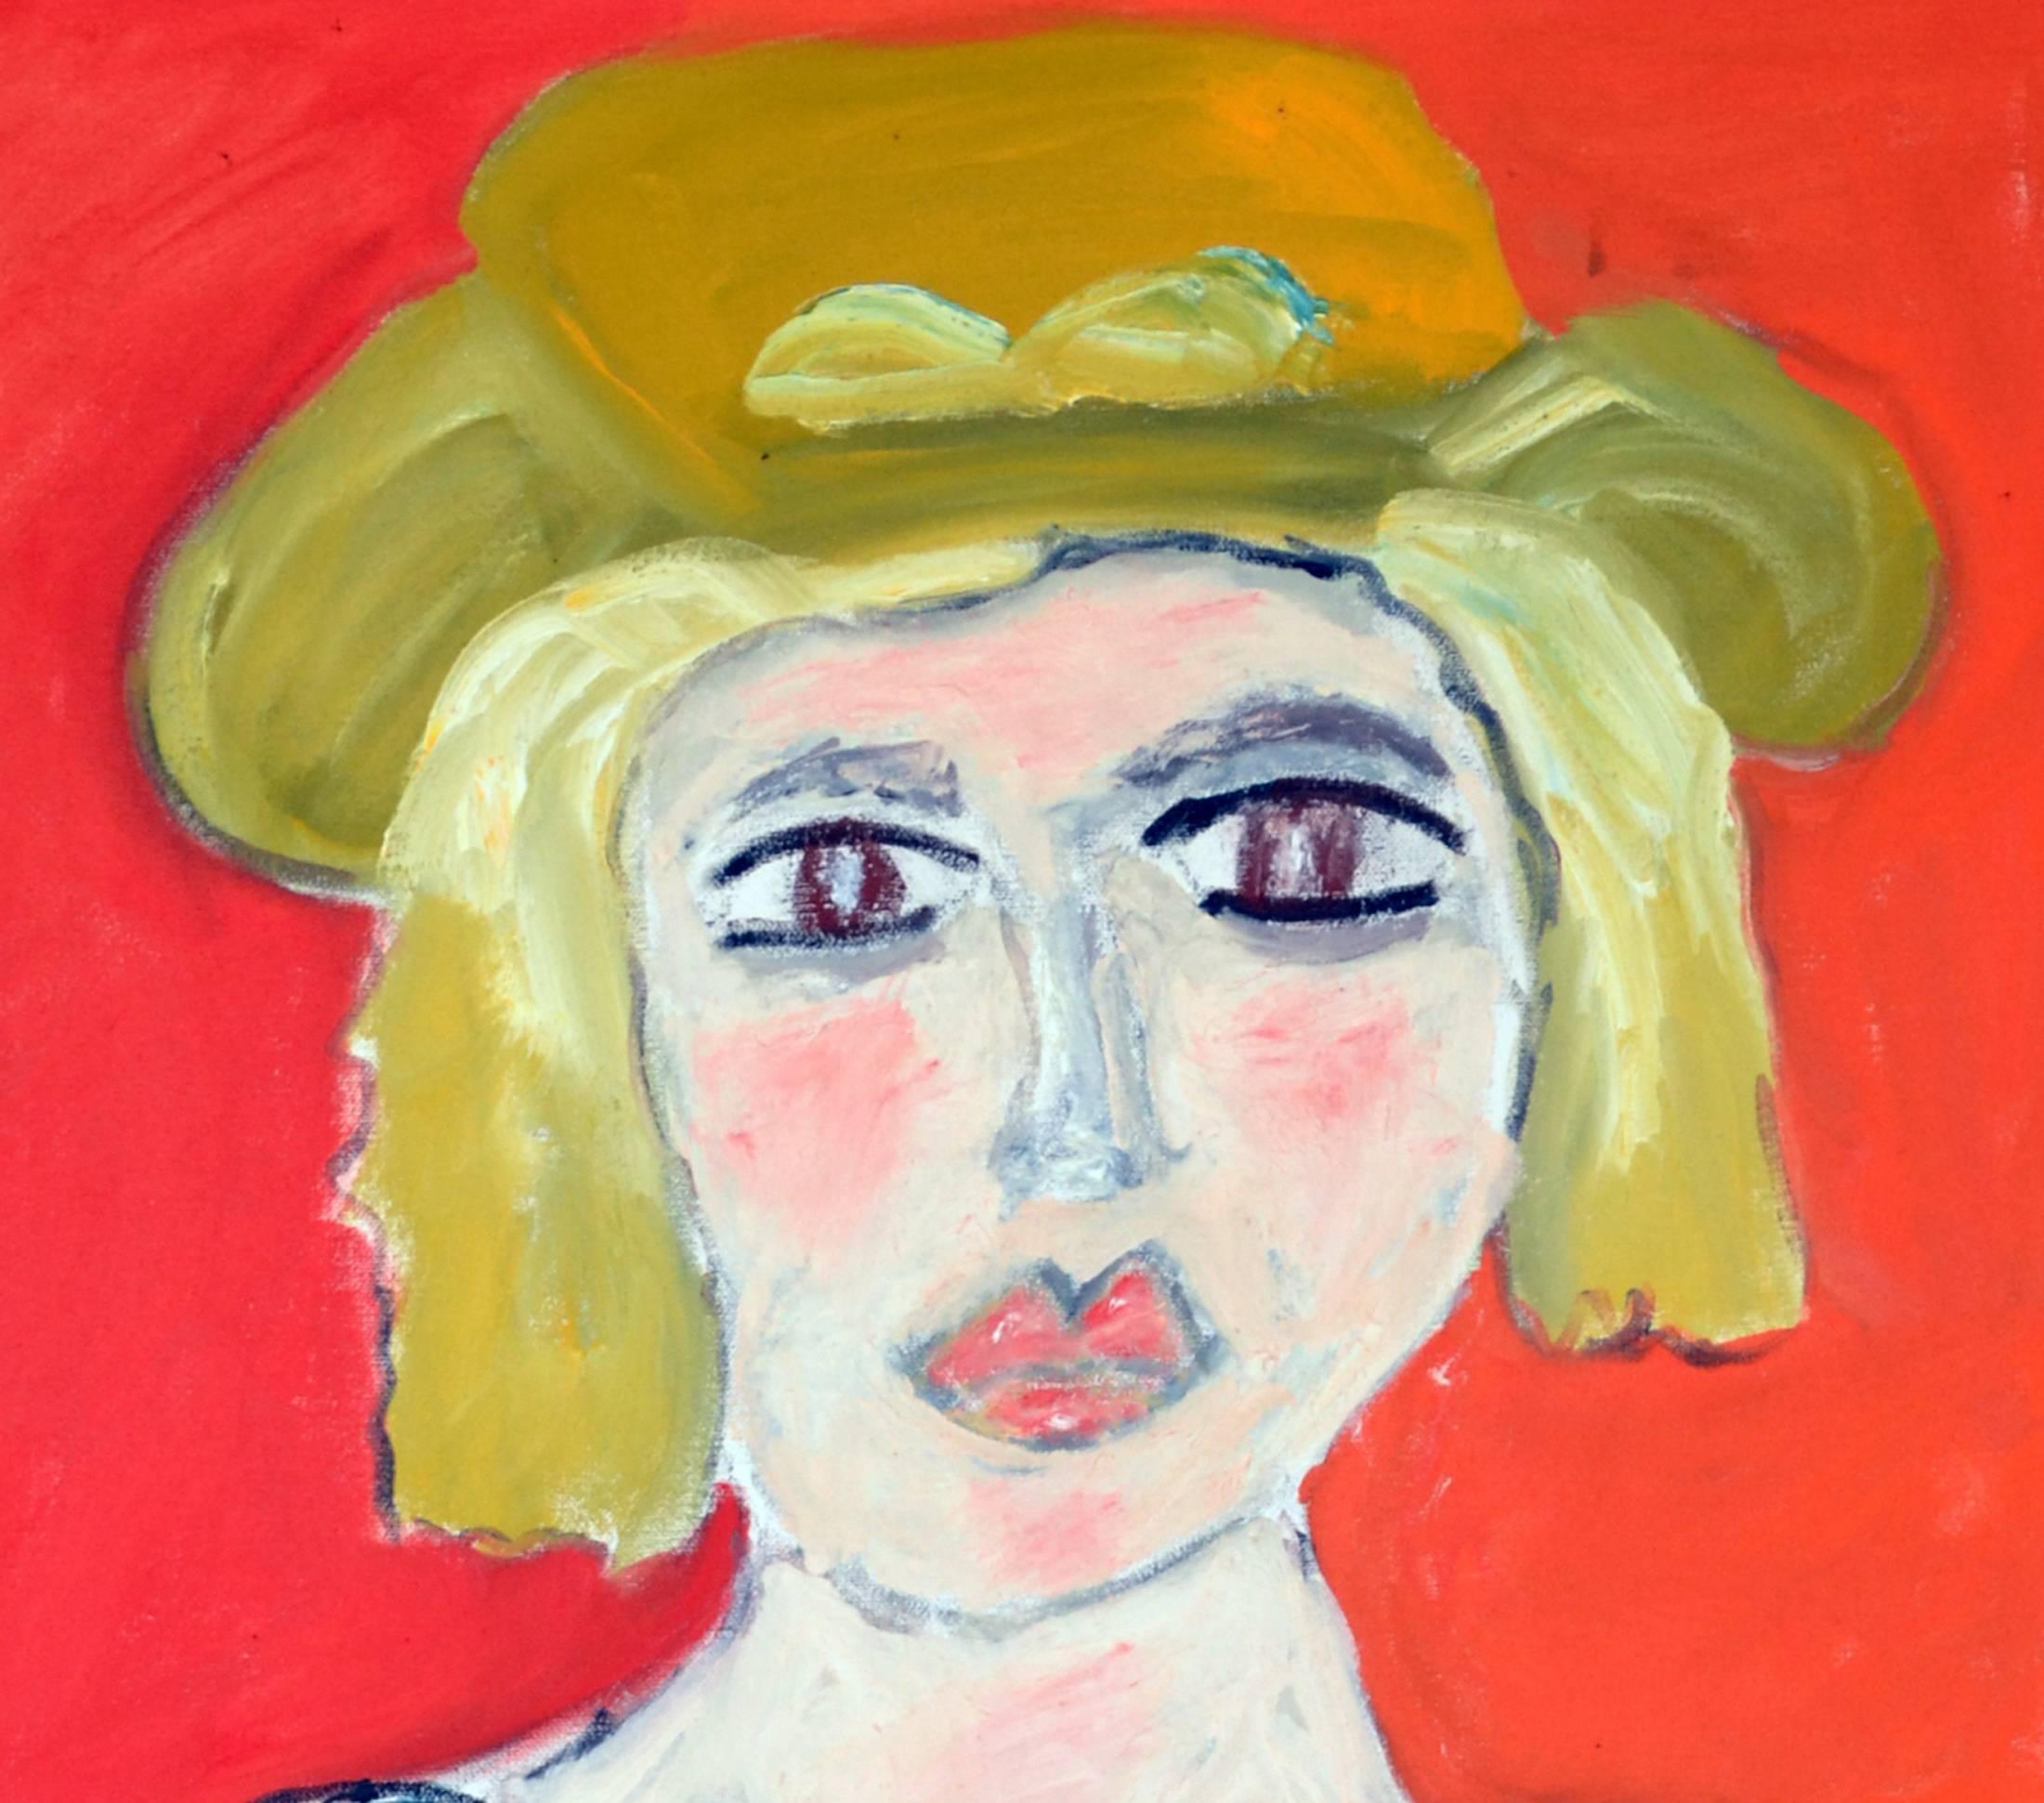 This exceptional expressionist painting titled Portrait of Lady With Yellow Western Hat Against Orange-Red is by highly listed and respected self-taught artist JoAnne Fleming (b. 1930). The artist's characteristic style exudes a primitive quality to